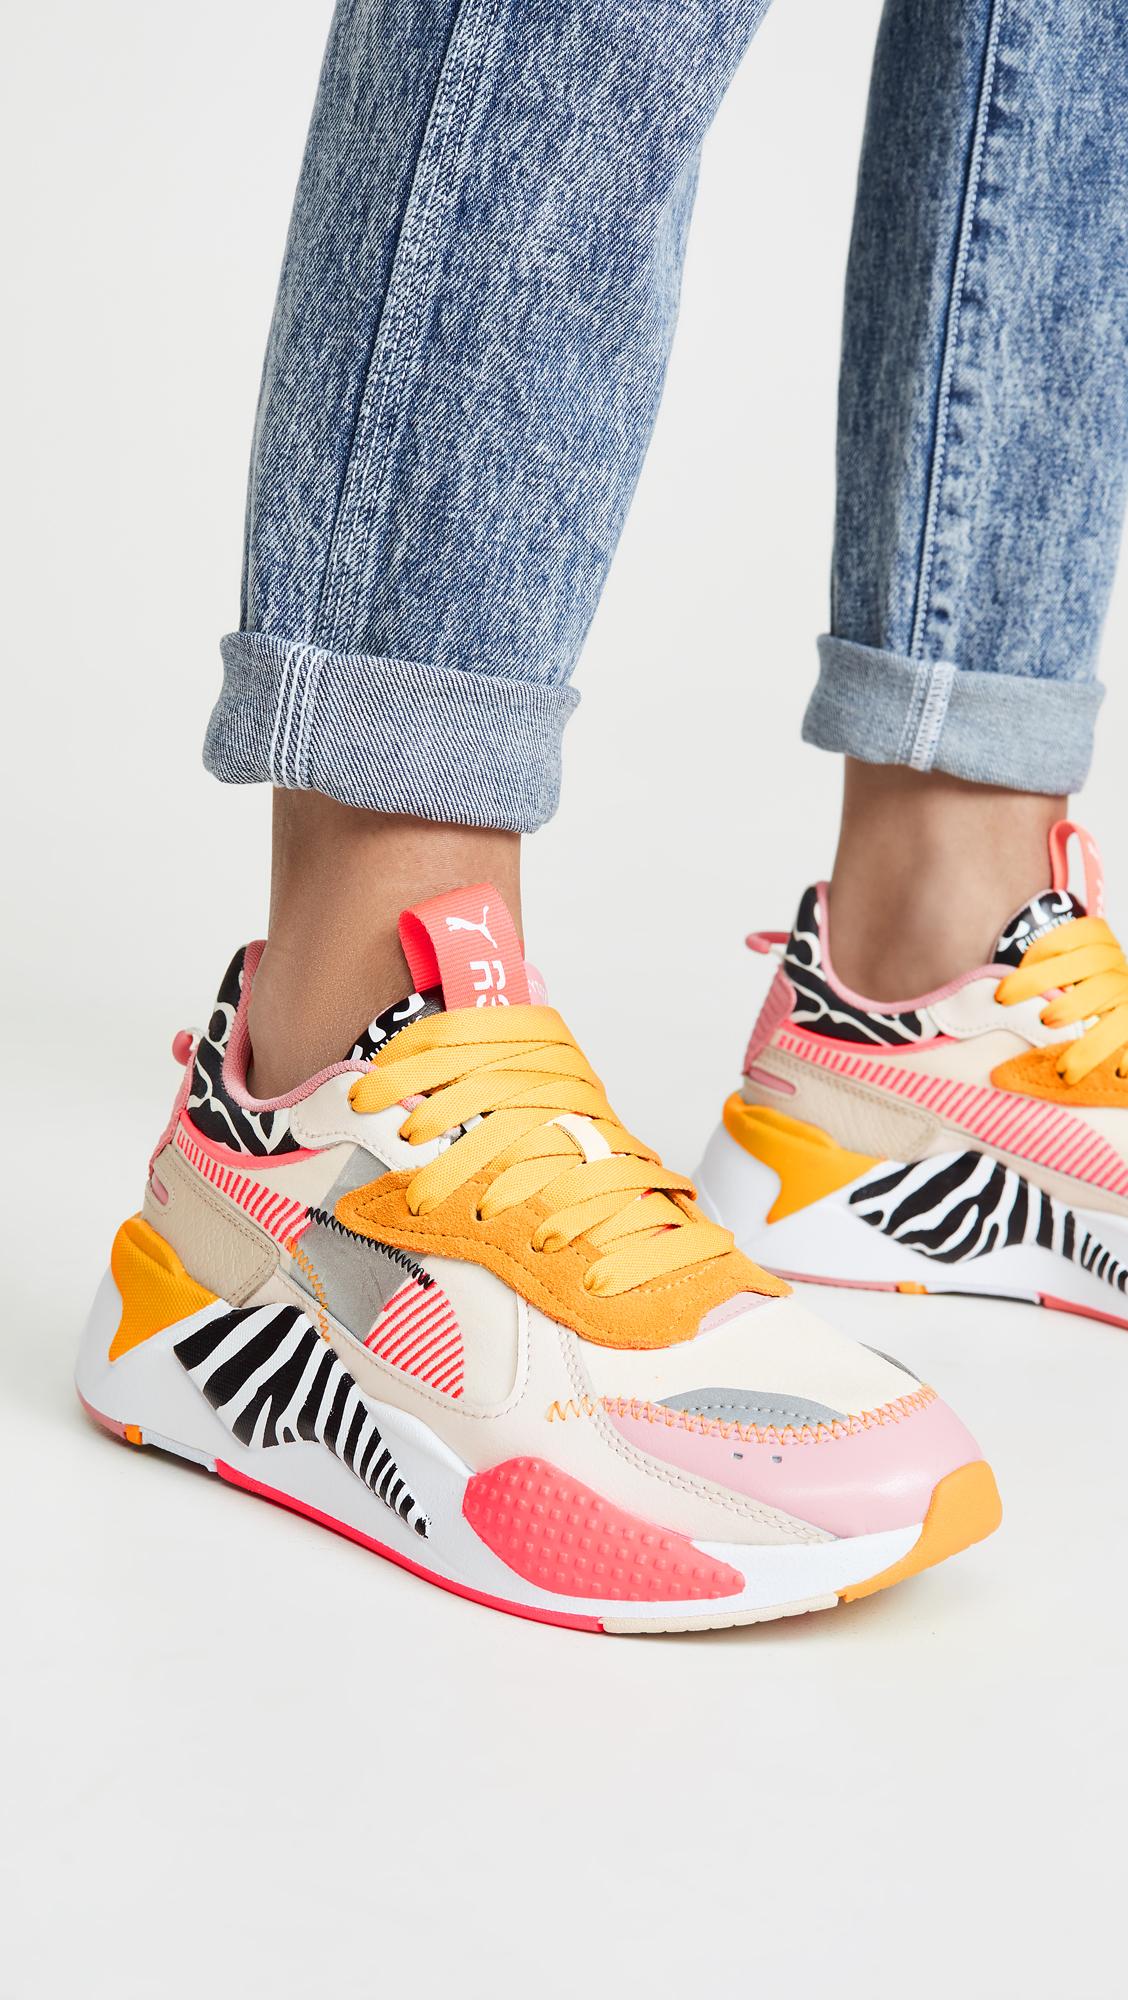 PUMA Rs-x Unexpected Mixes Sneakers in Pink | Lyst